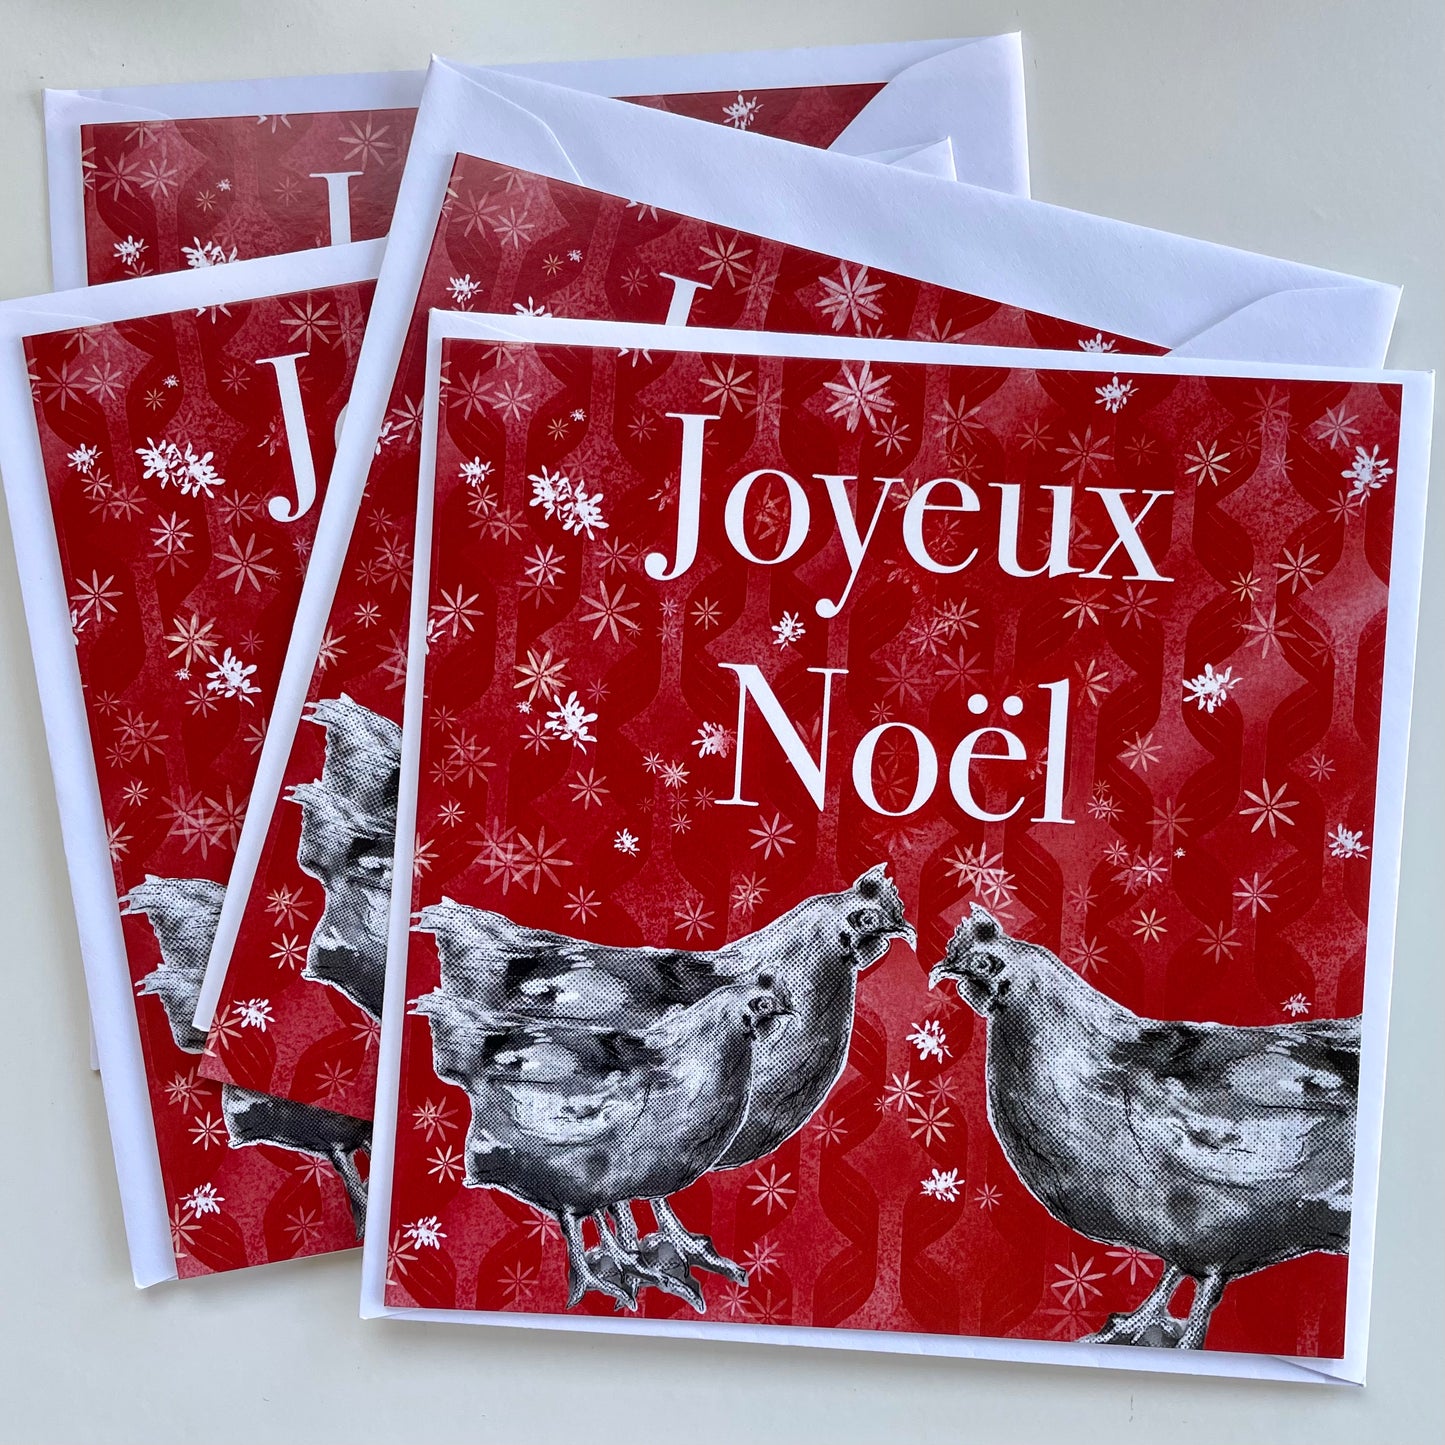 Three French Hens Christmas Cards